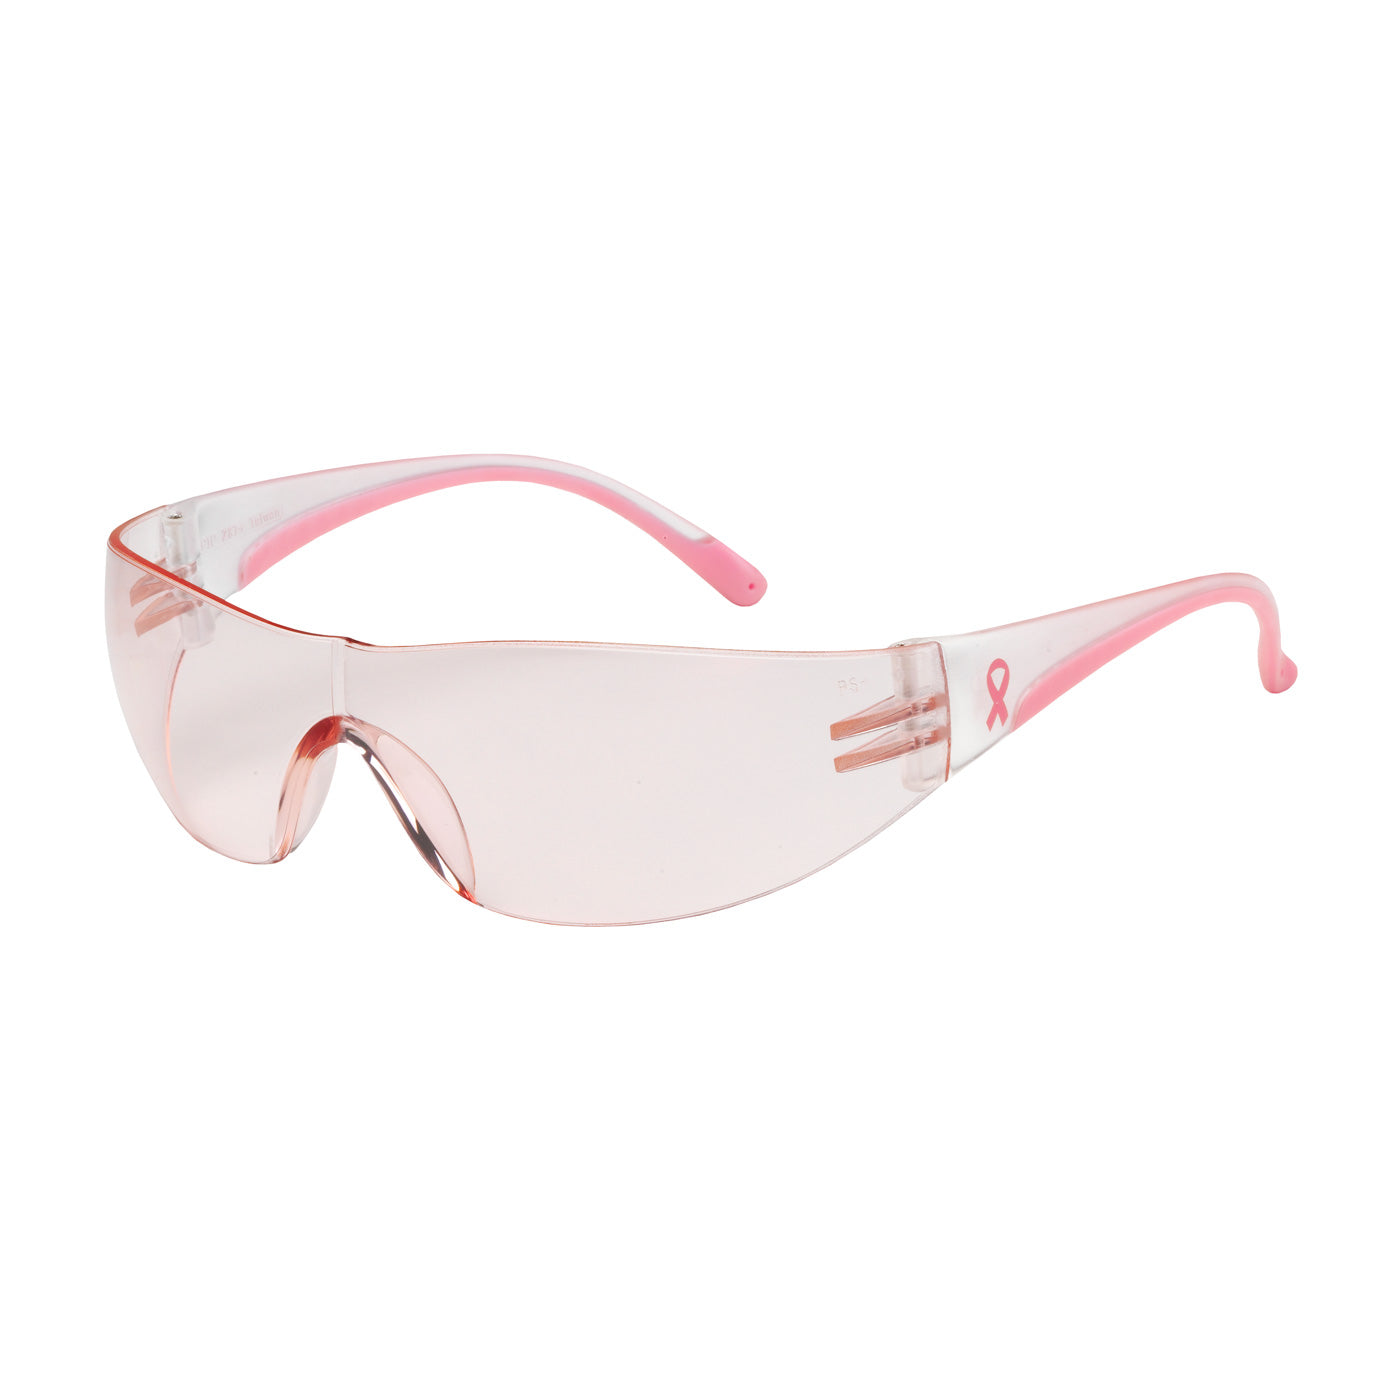 Rimless Safety Glasses with Clear / Pink Temple, Pink Lens and Anti-Scratch Coating-eSafety Supplies, Inc